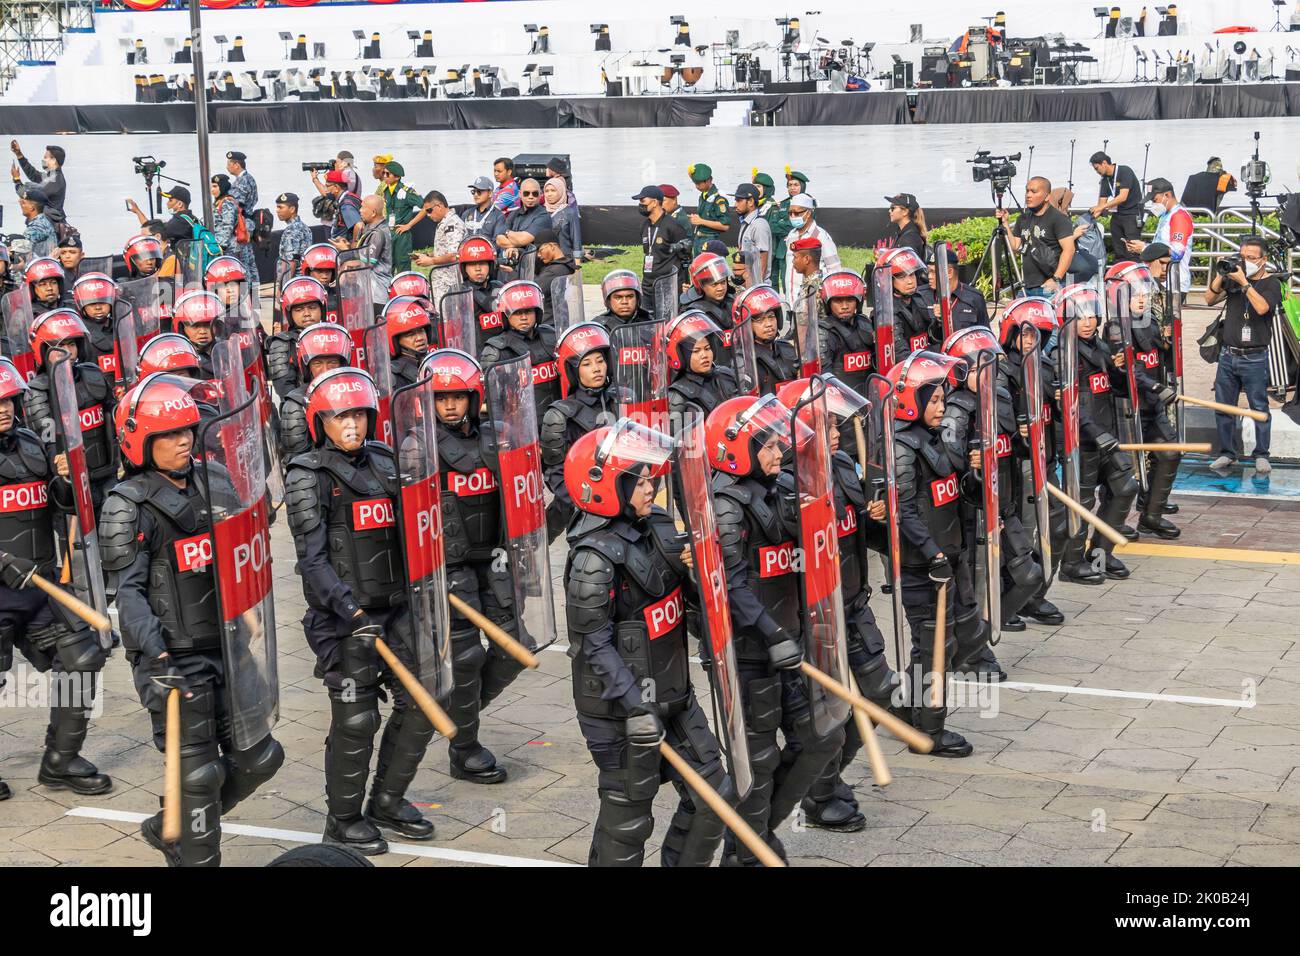 Malaysian anti riot polices or Federal Reserve Unit marching with batons and shields during 65th Malaysia National Day parade in Kuala Lumpur. Stock Photo